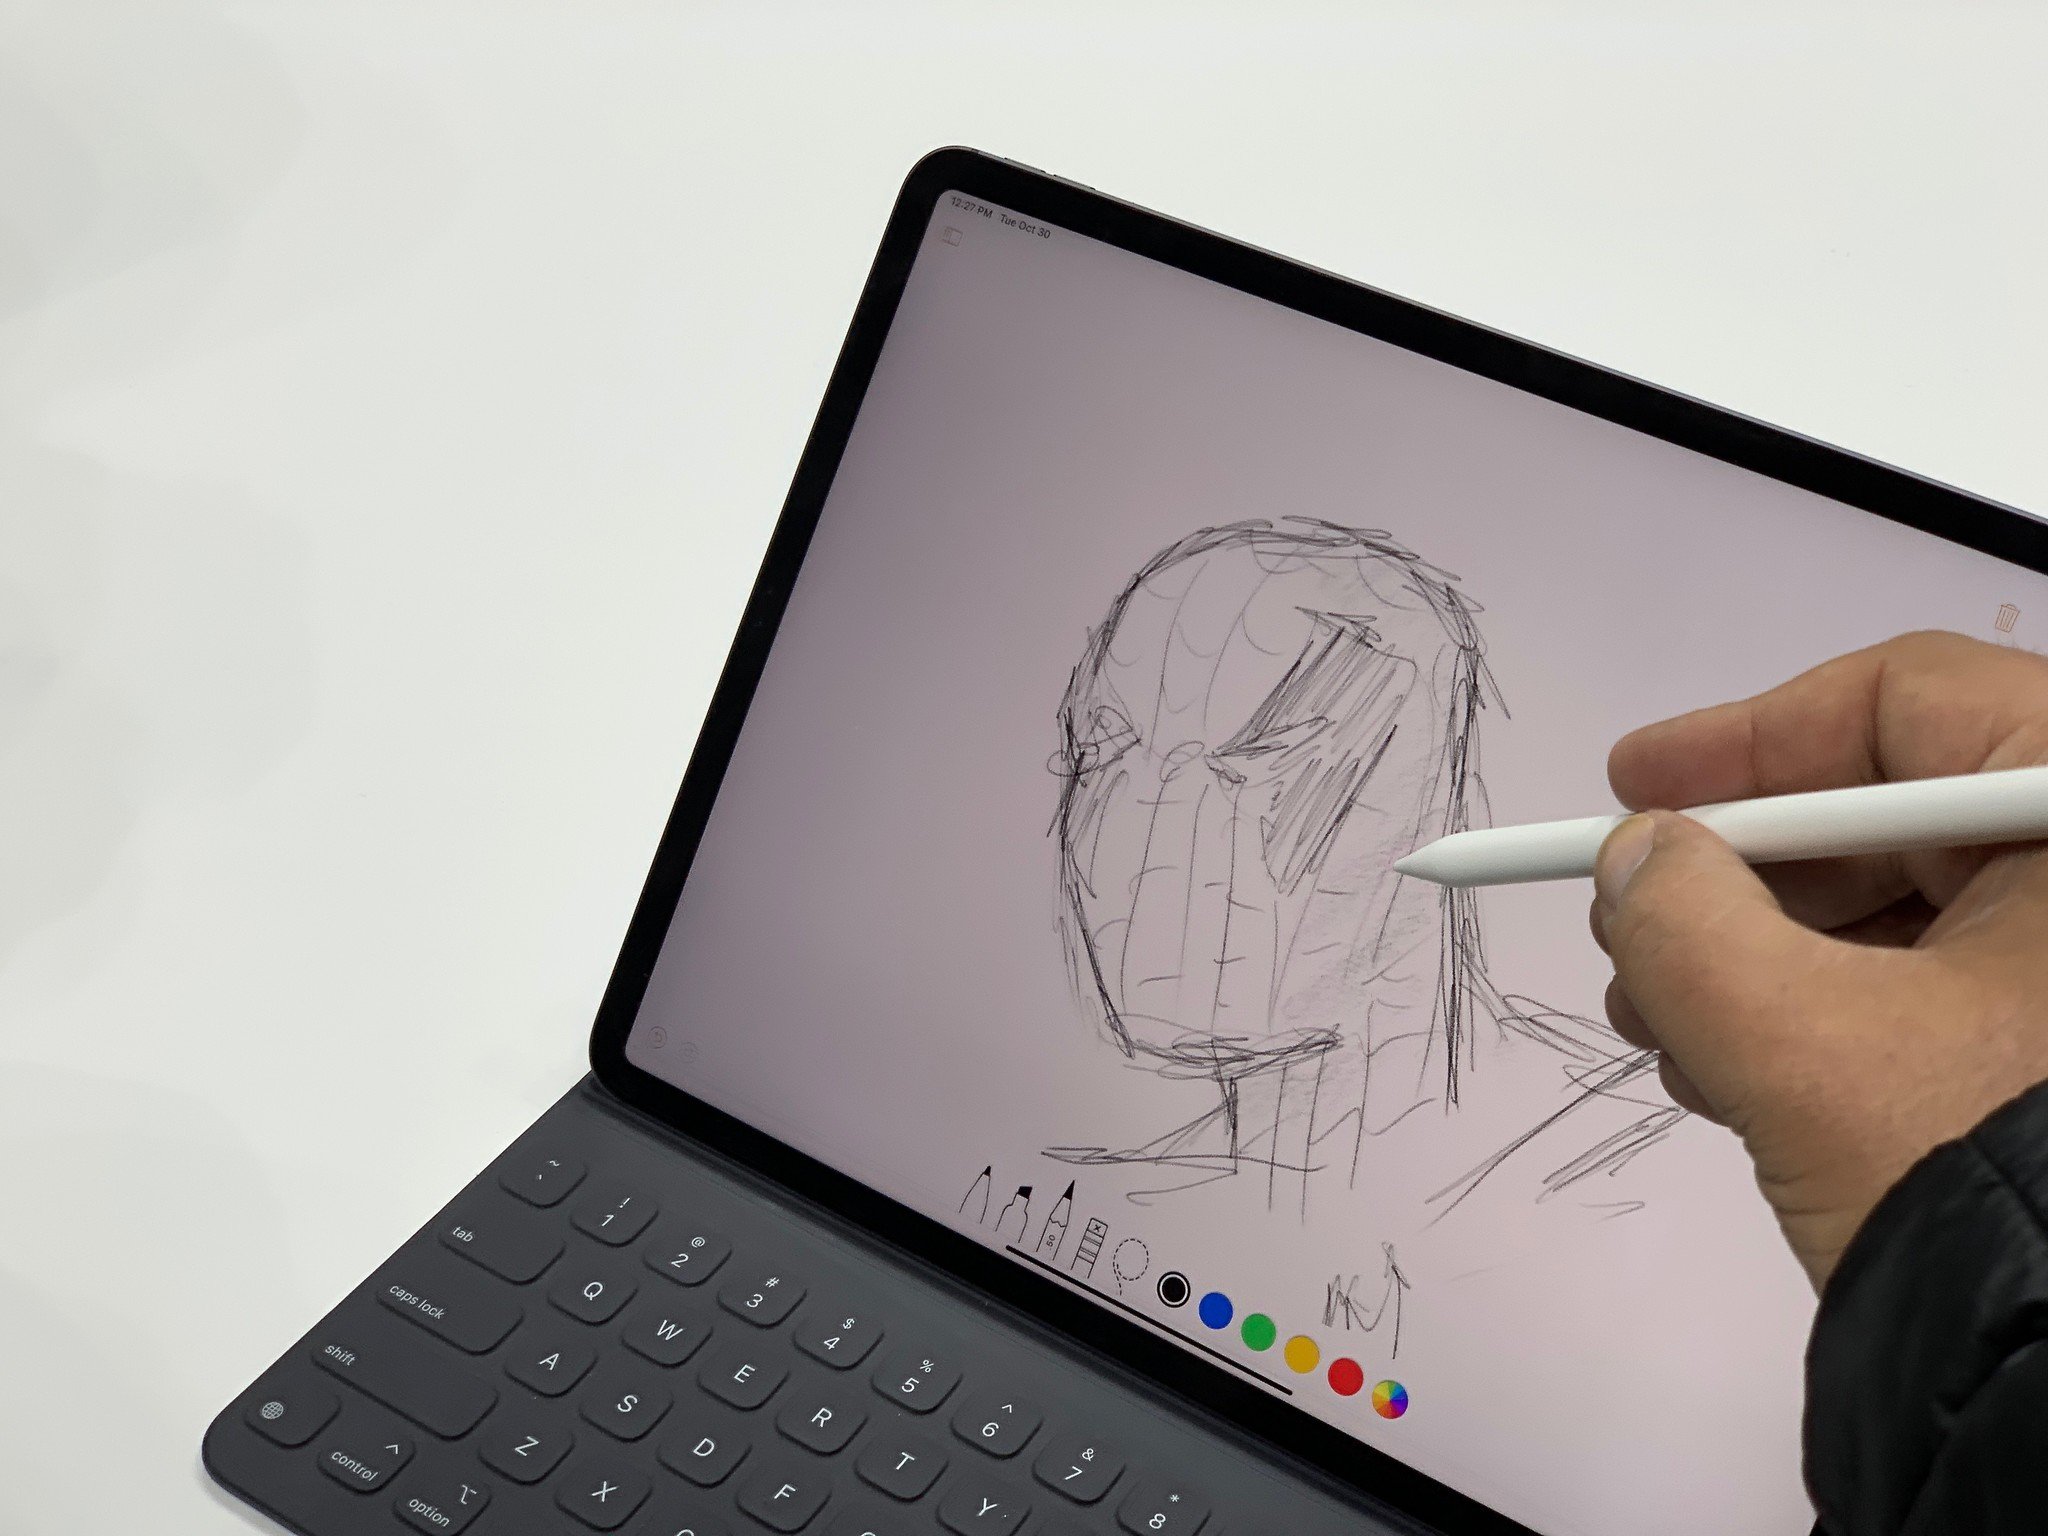 How To Learn To Draw With Ipad And Apple Pencil Imore